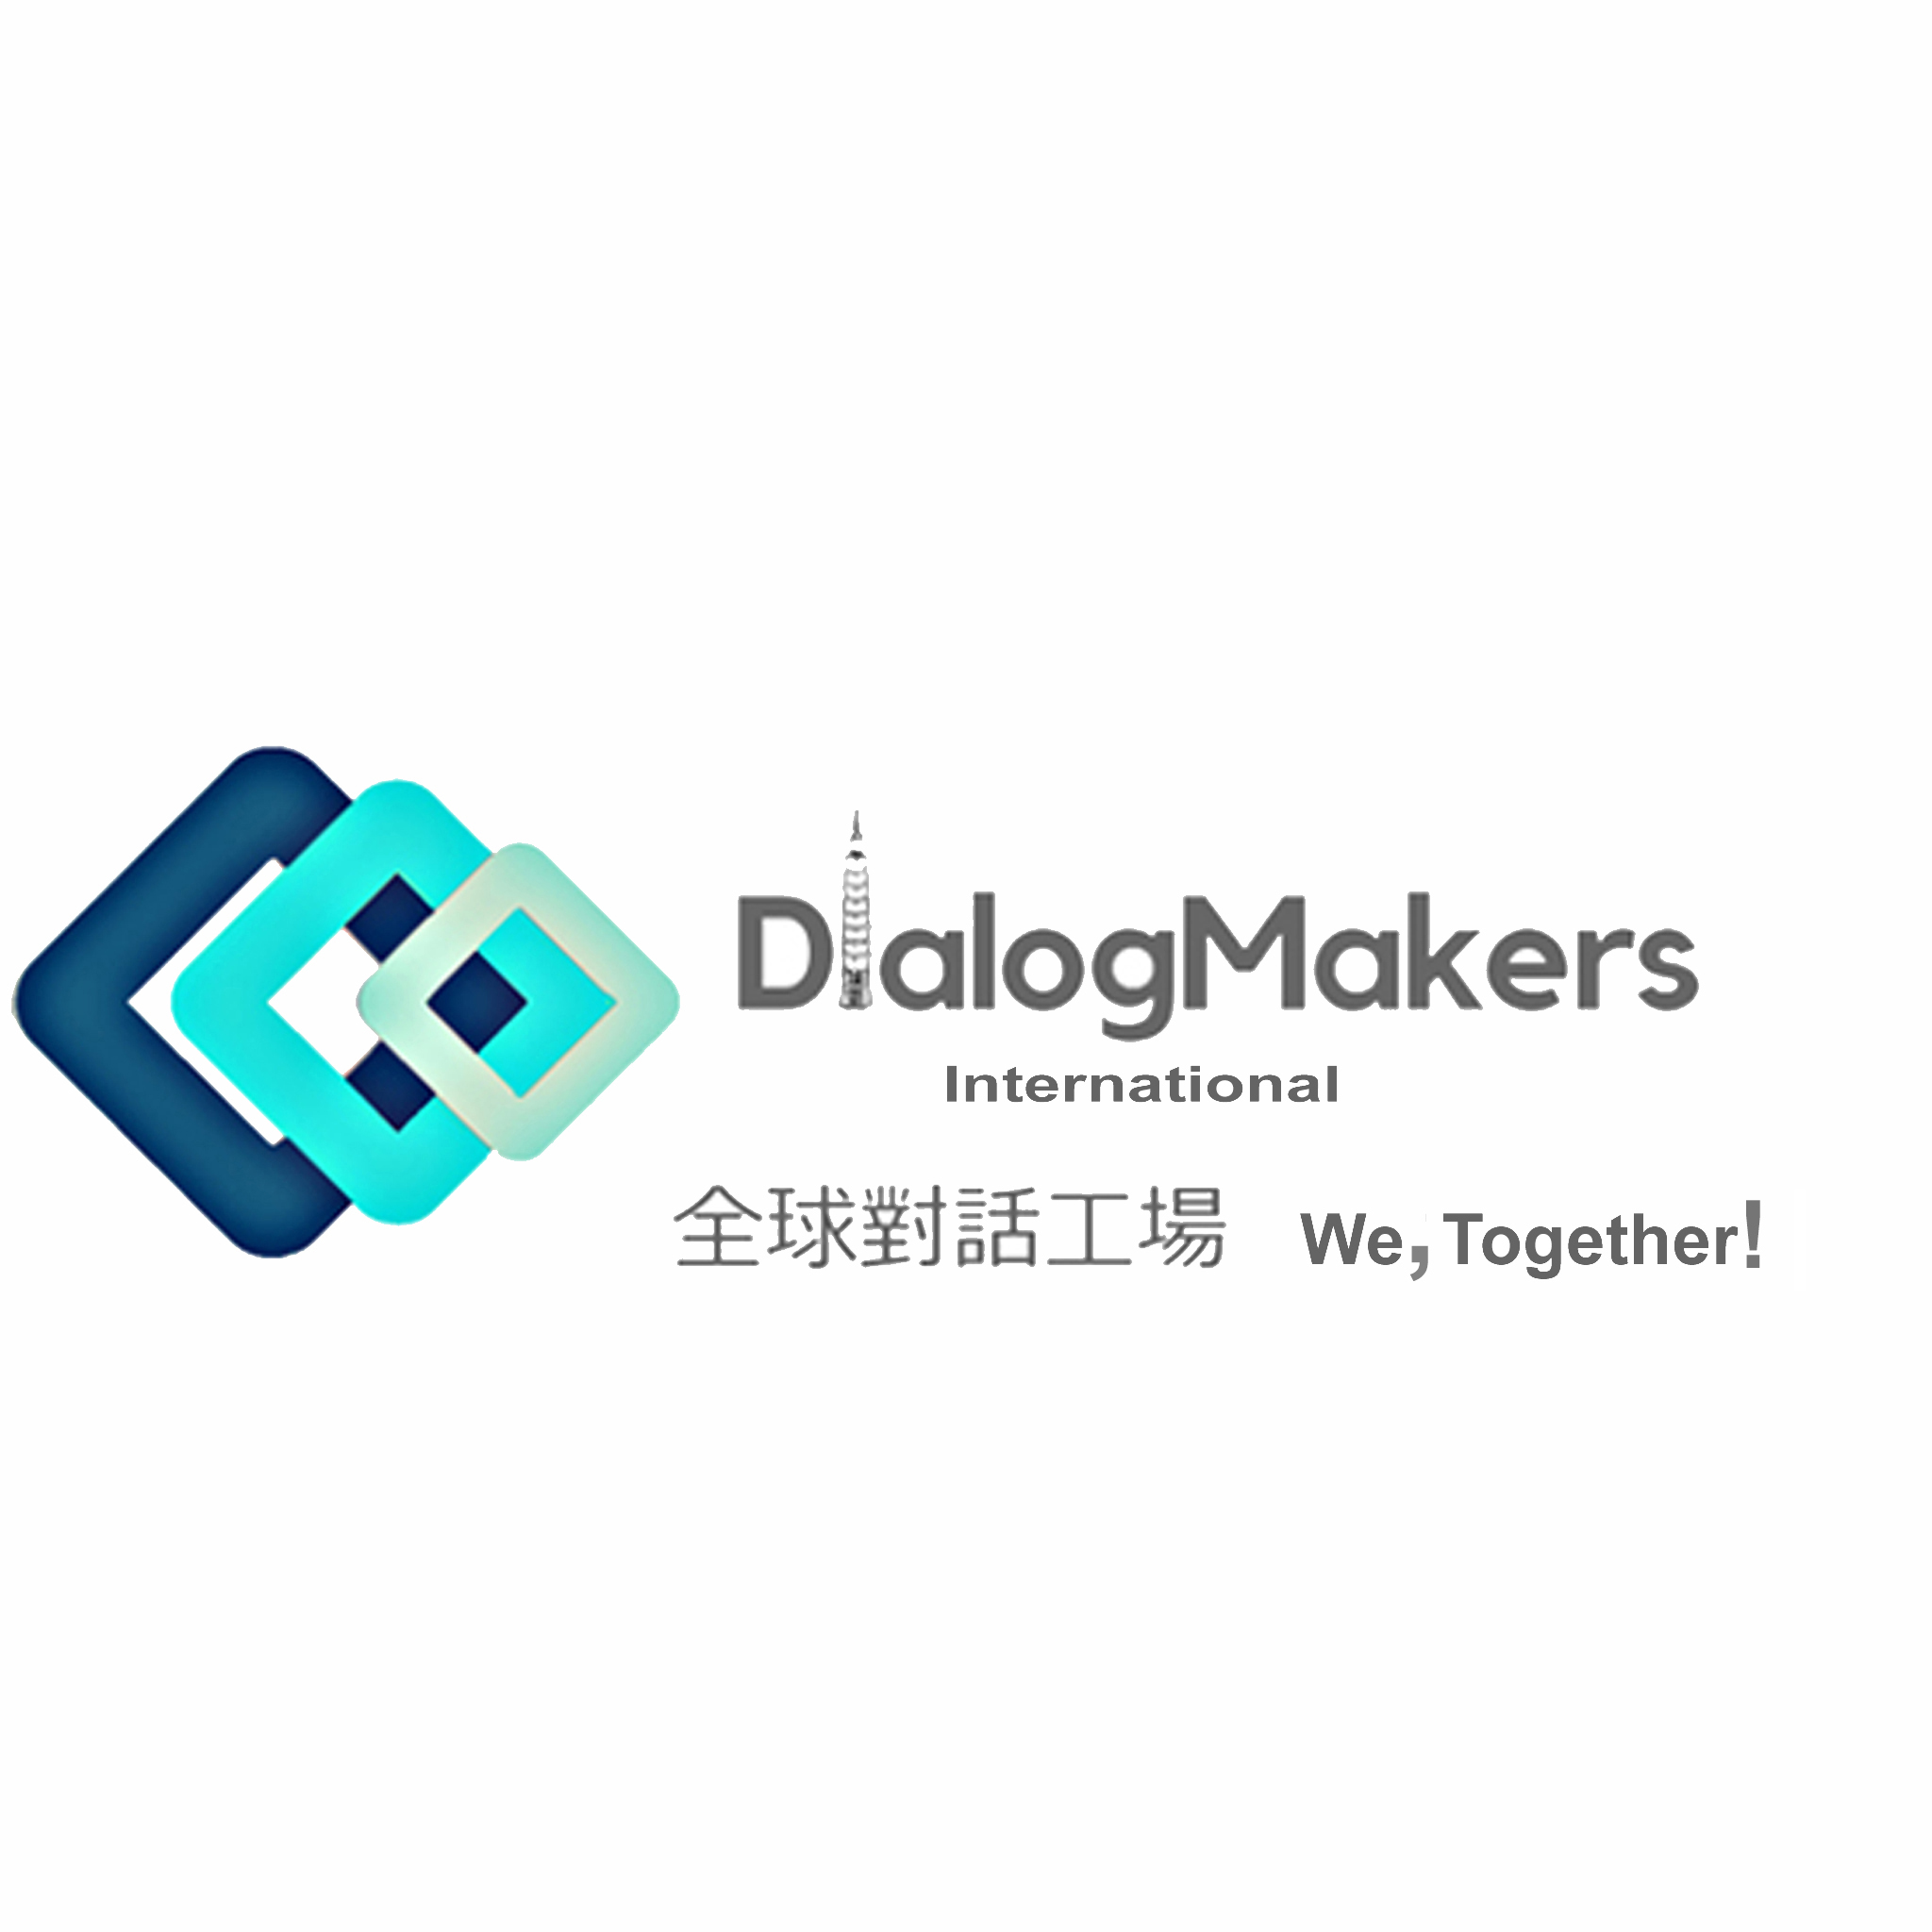 A New Online Community Vibe With Dialogmakers